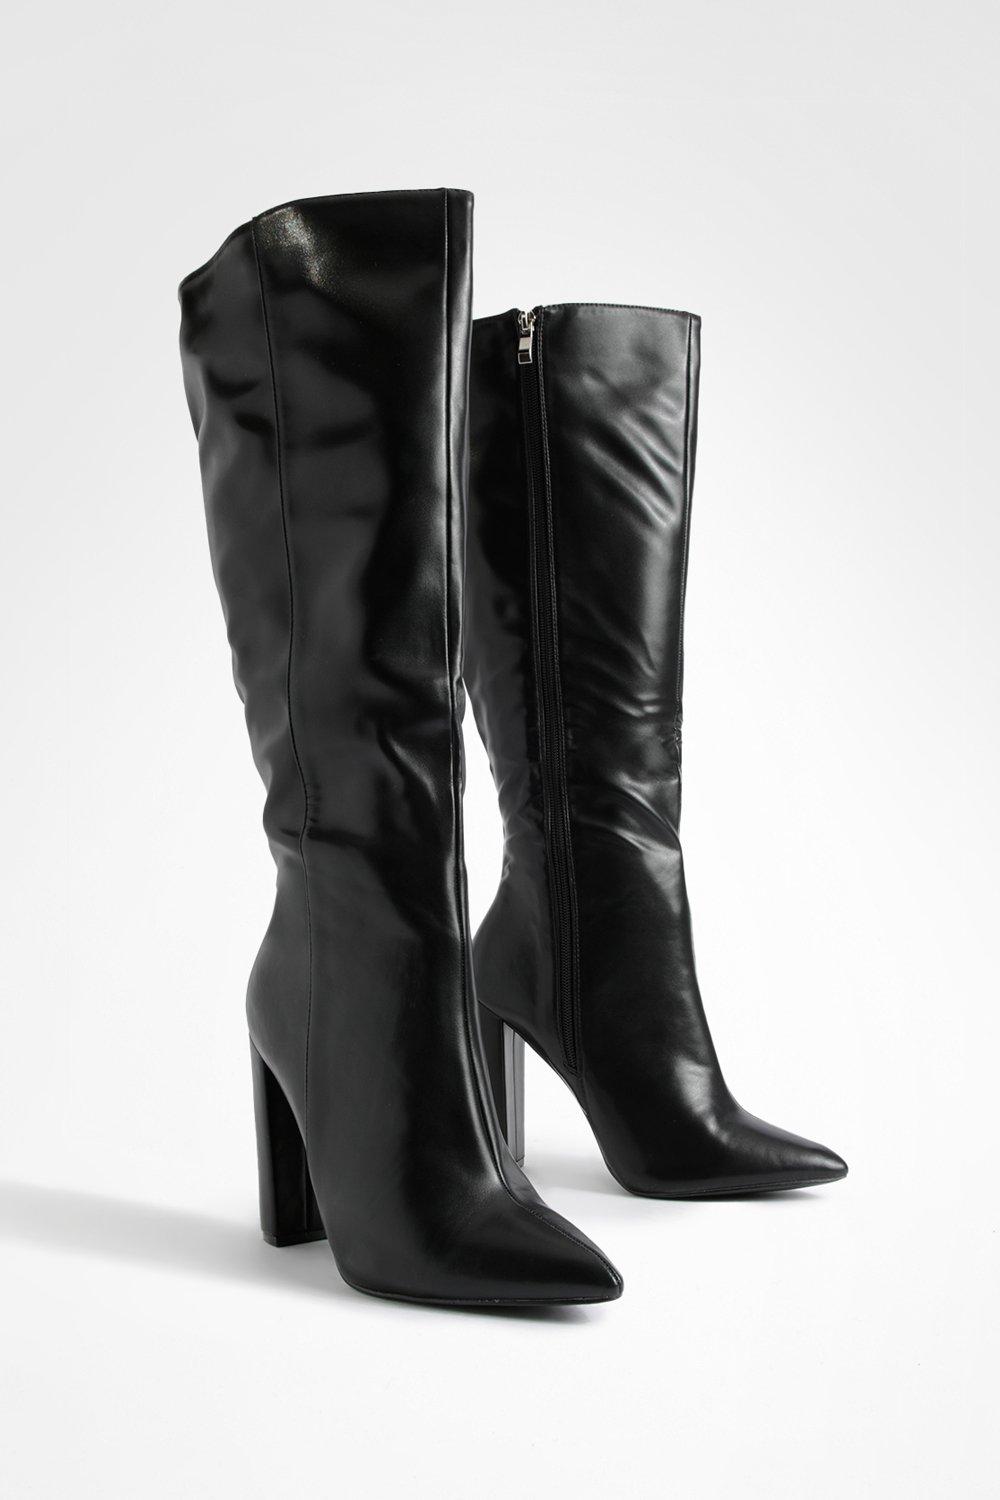 Womens Wide Fit Pointed Toe Knee High Boots - Black - 7, Black